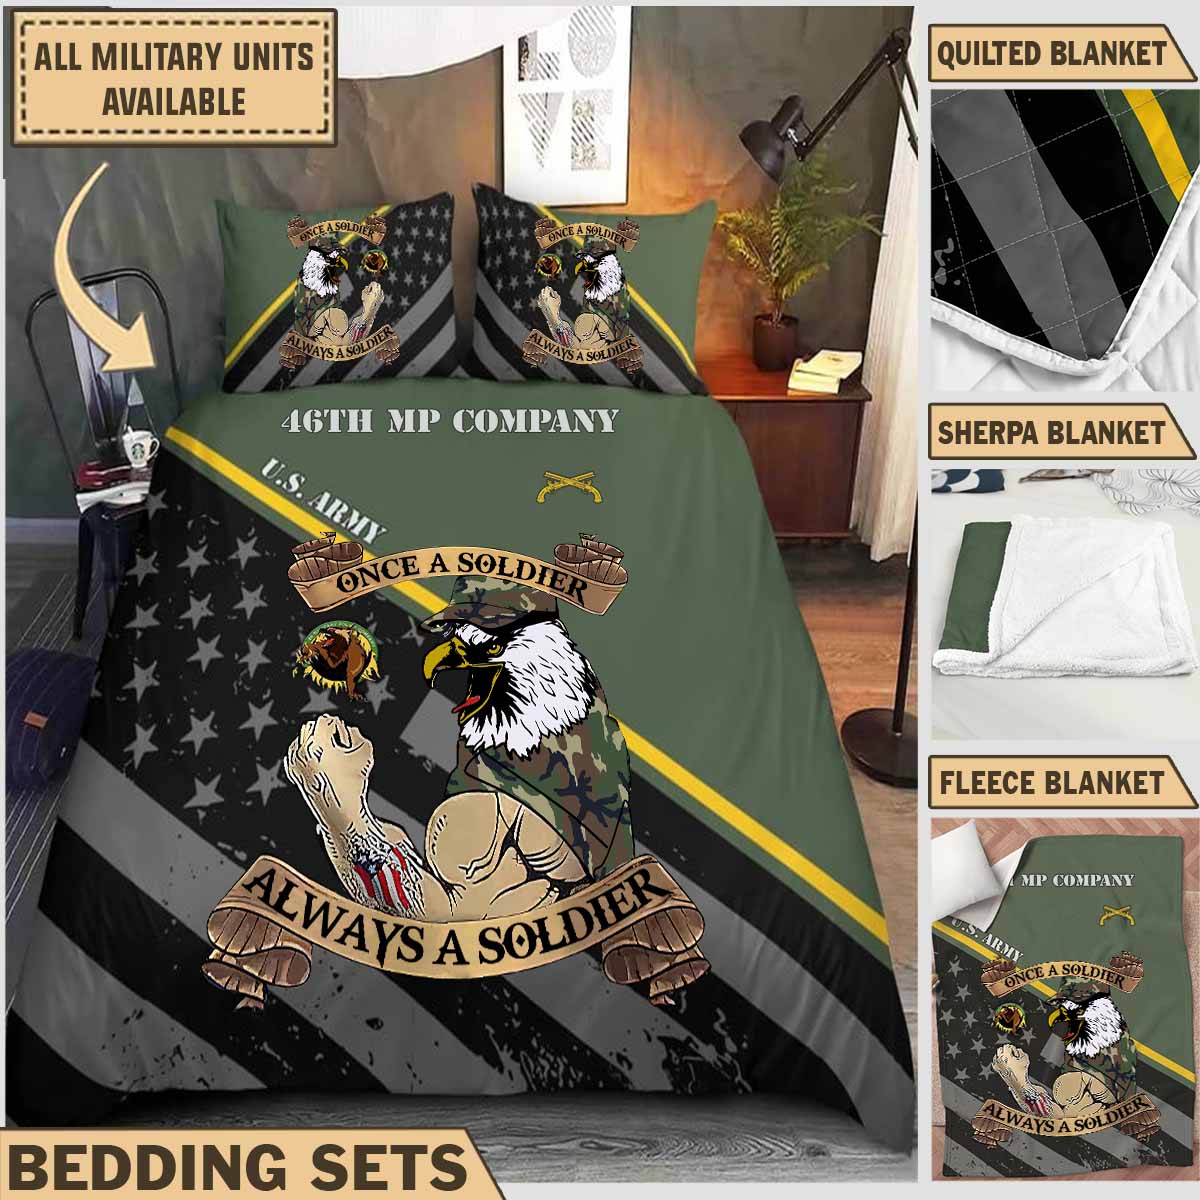 46th MP CO 46th Military Police Company_Bedding Collection